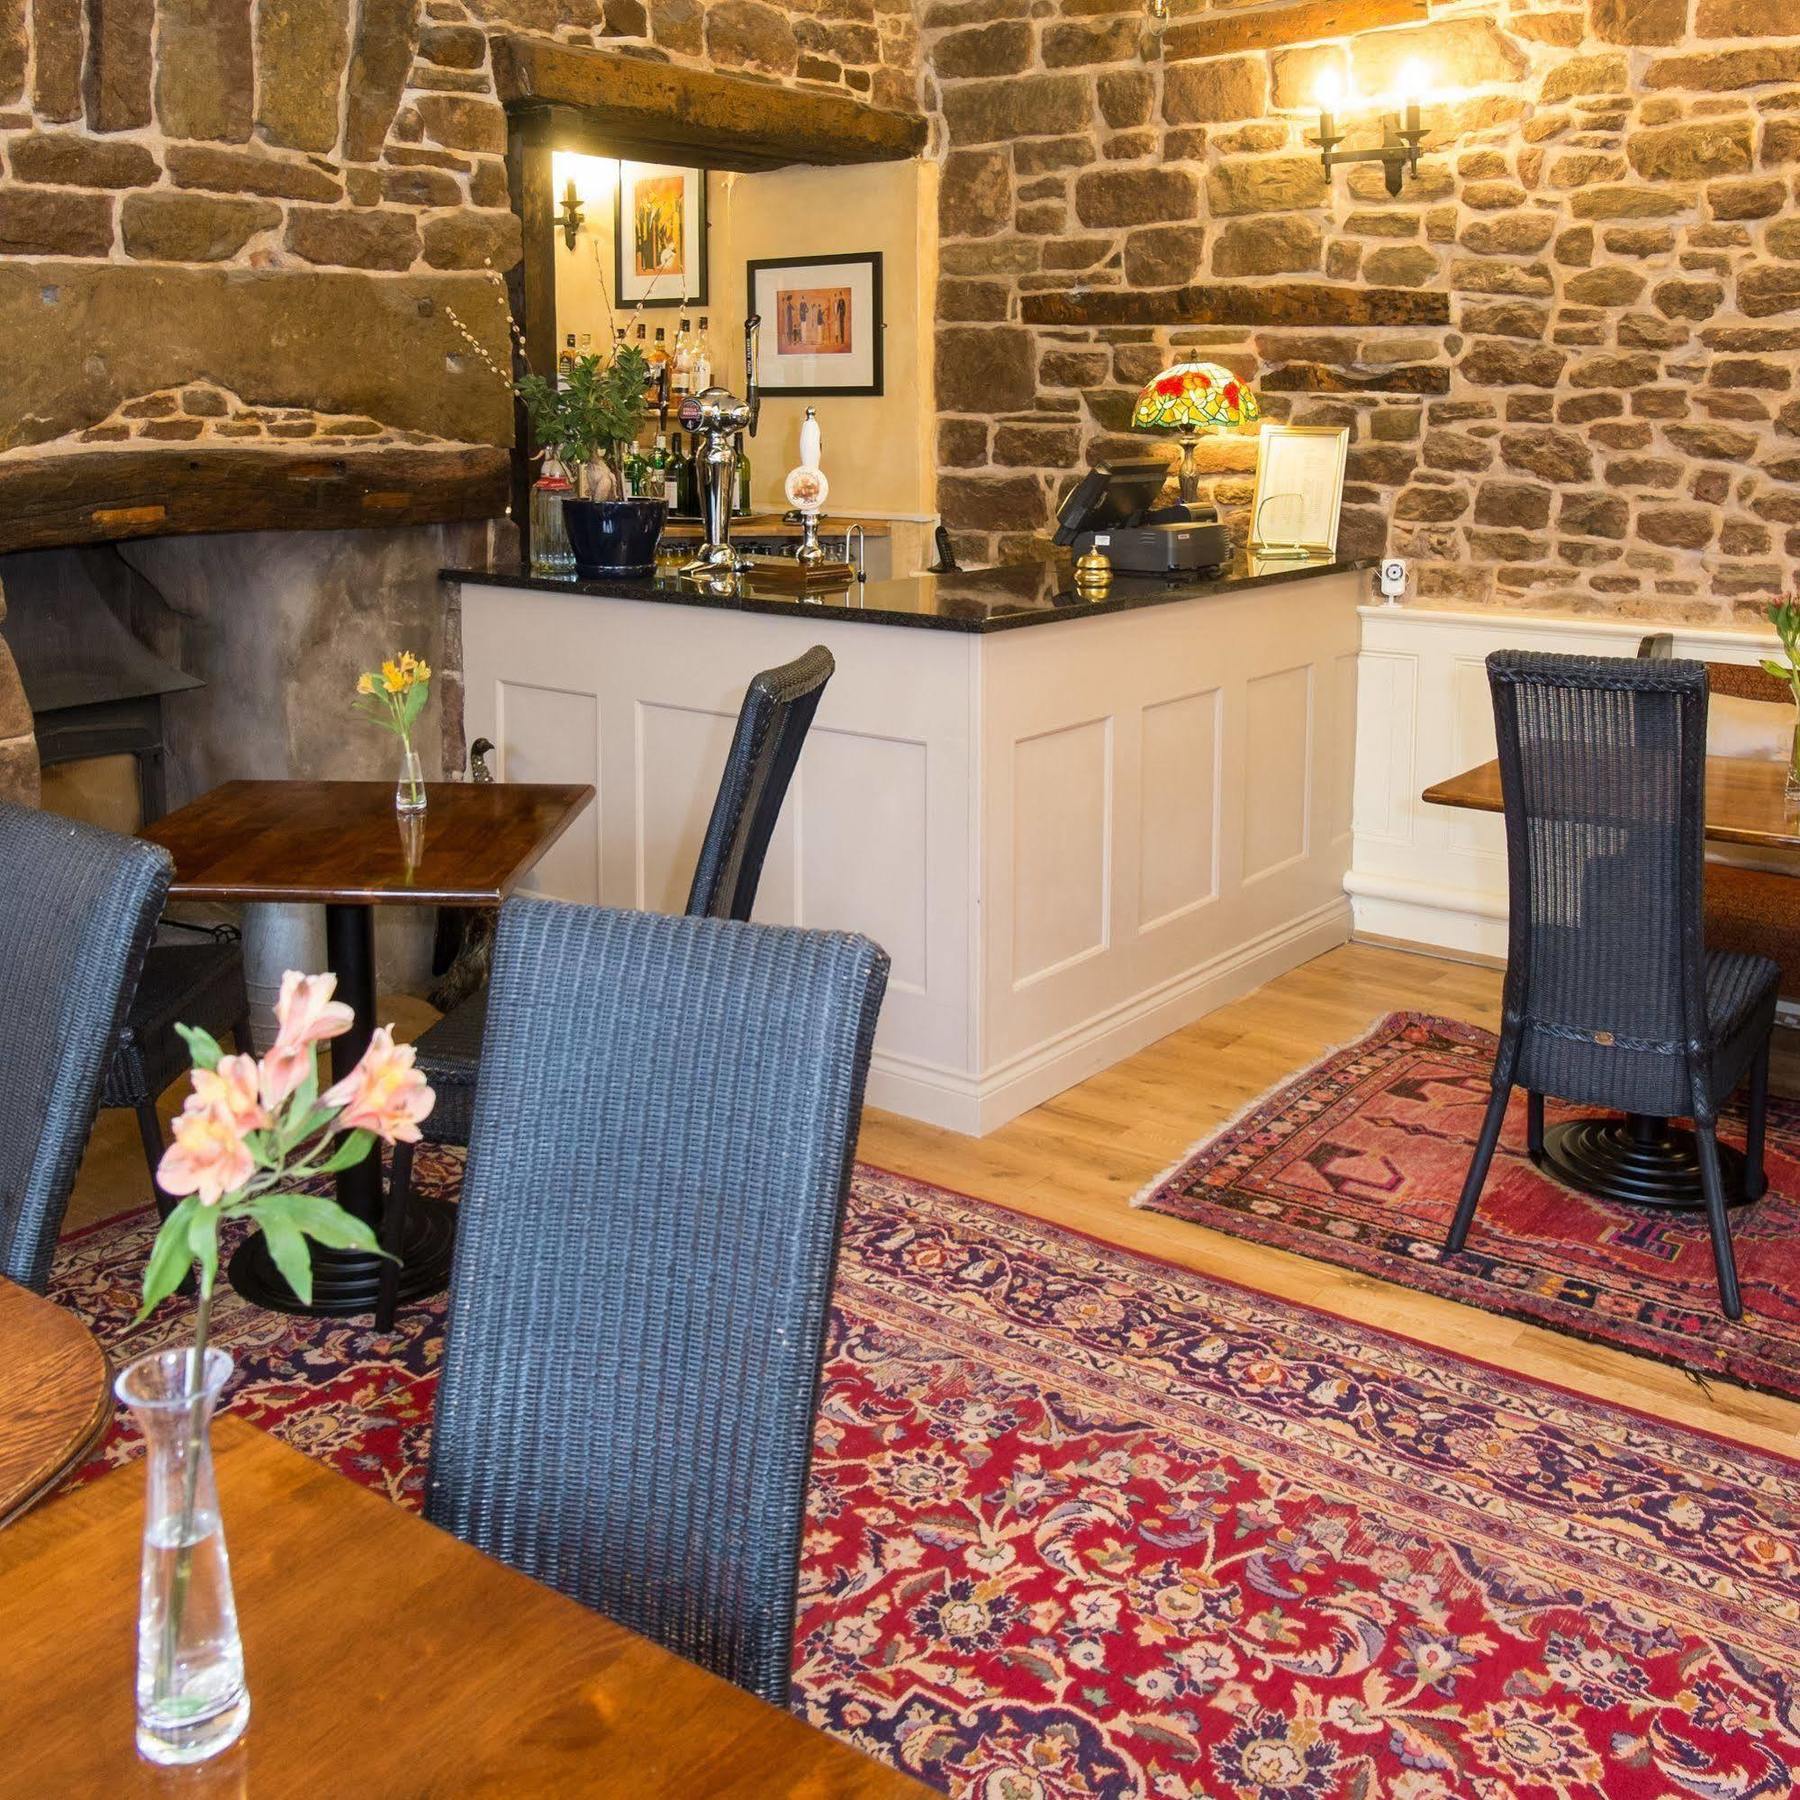 Wilton Court Restaurant With Rooms Ross-on-Wye ภายนอก รูปภาพ